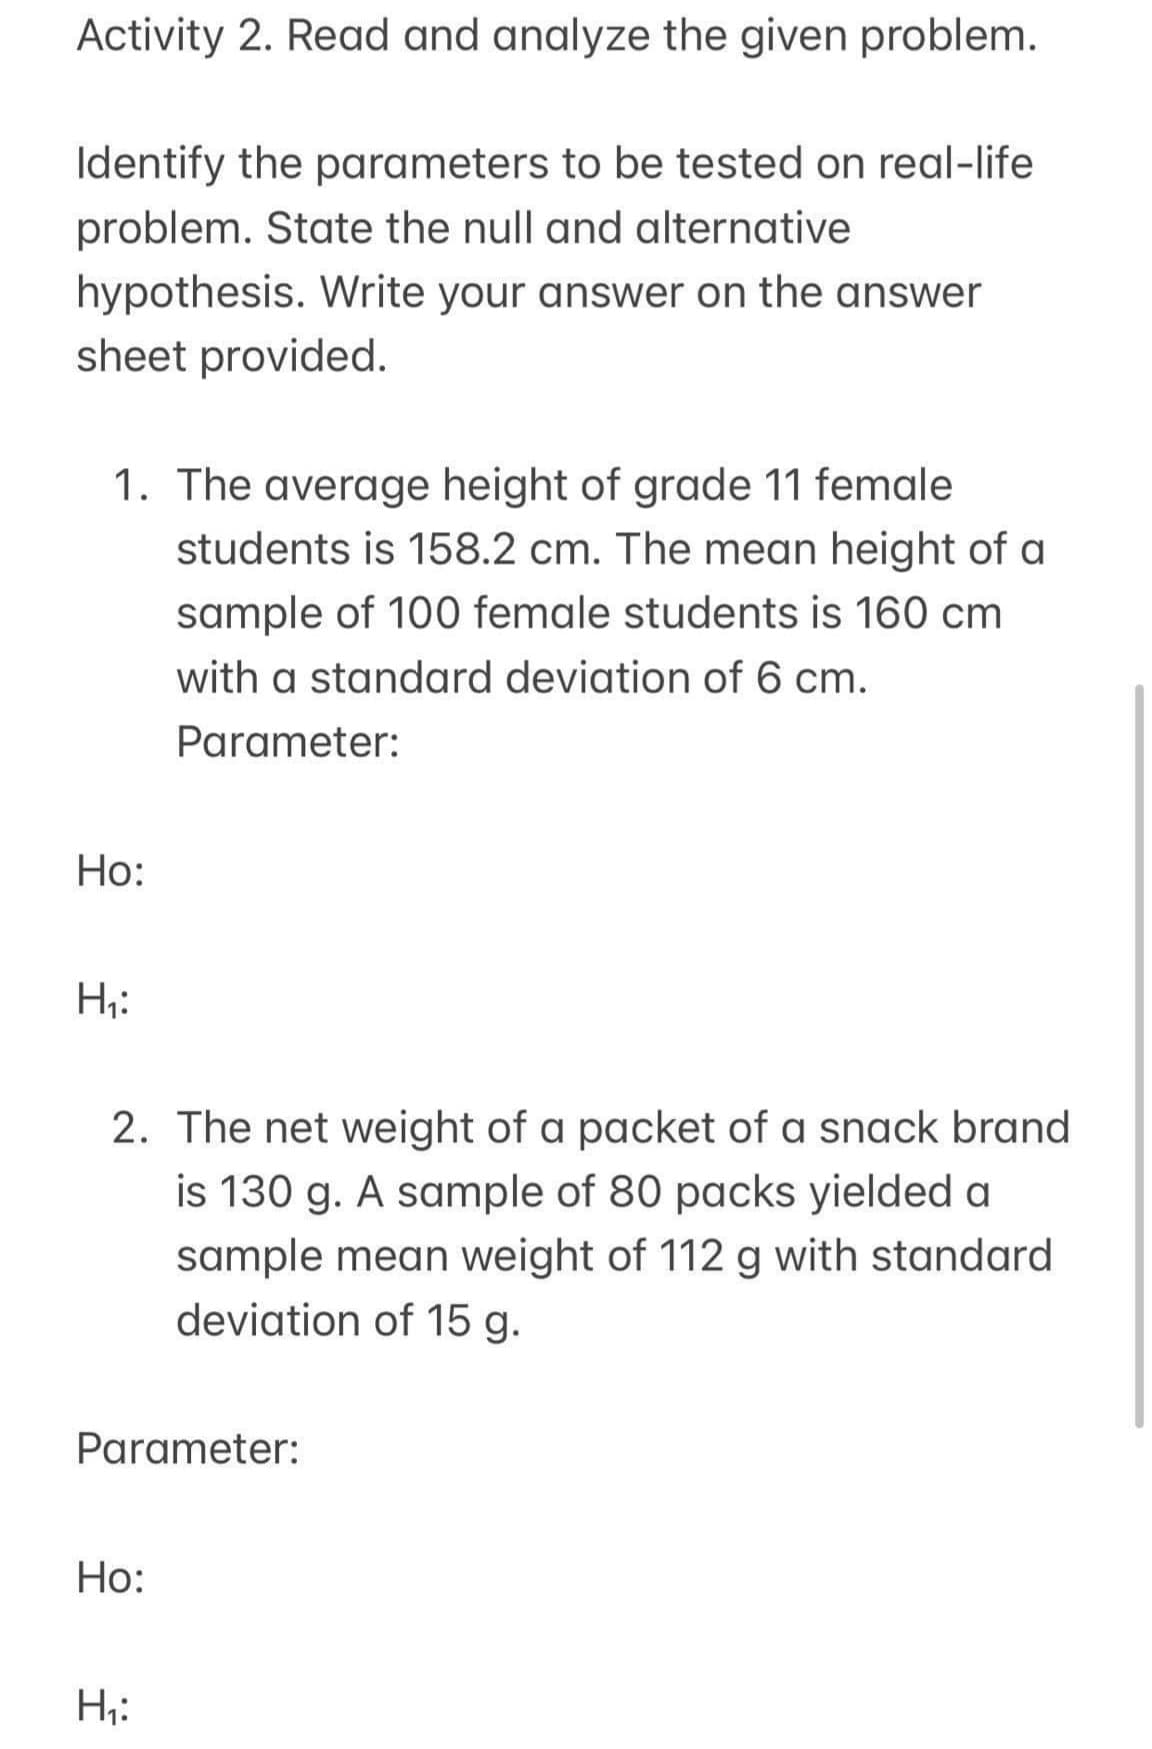 Activity 2. Read and analyze the given problem.
Identify the parameters to be tested on real-life
problem. State the null and alternative
hypothesis. Write your answer on the answer
sheet provided.
1. The average height of grade 11 female
students is 158.2 cm. The mean height of a
sample of 100 female students is 160 cm
with a standard deviation of 6 cm.
Parameter:
Ho:
H₁:
2. The net weight of a packet of a snack brand
is 130 g. A sample of 80 packs yielded a
sample mean weight of 112 g with standard
deviation of 15 g.
Parameter:
Ho:
H₁: